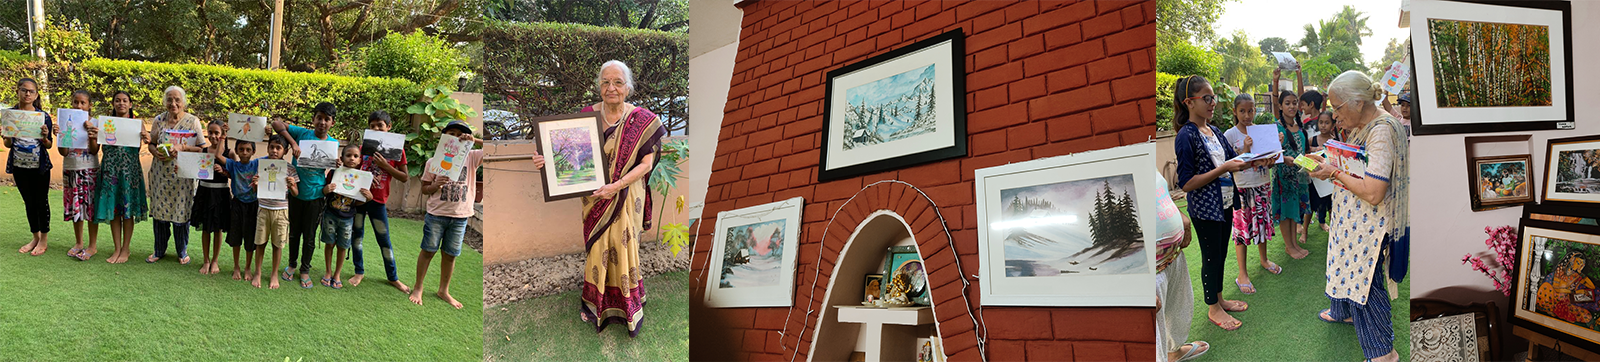 A Tapestry of Life Woven in Her Paintings, Mrs Vinod Kapoor Continues to Inspire at 82